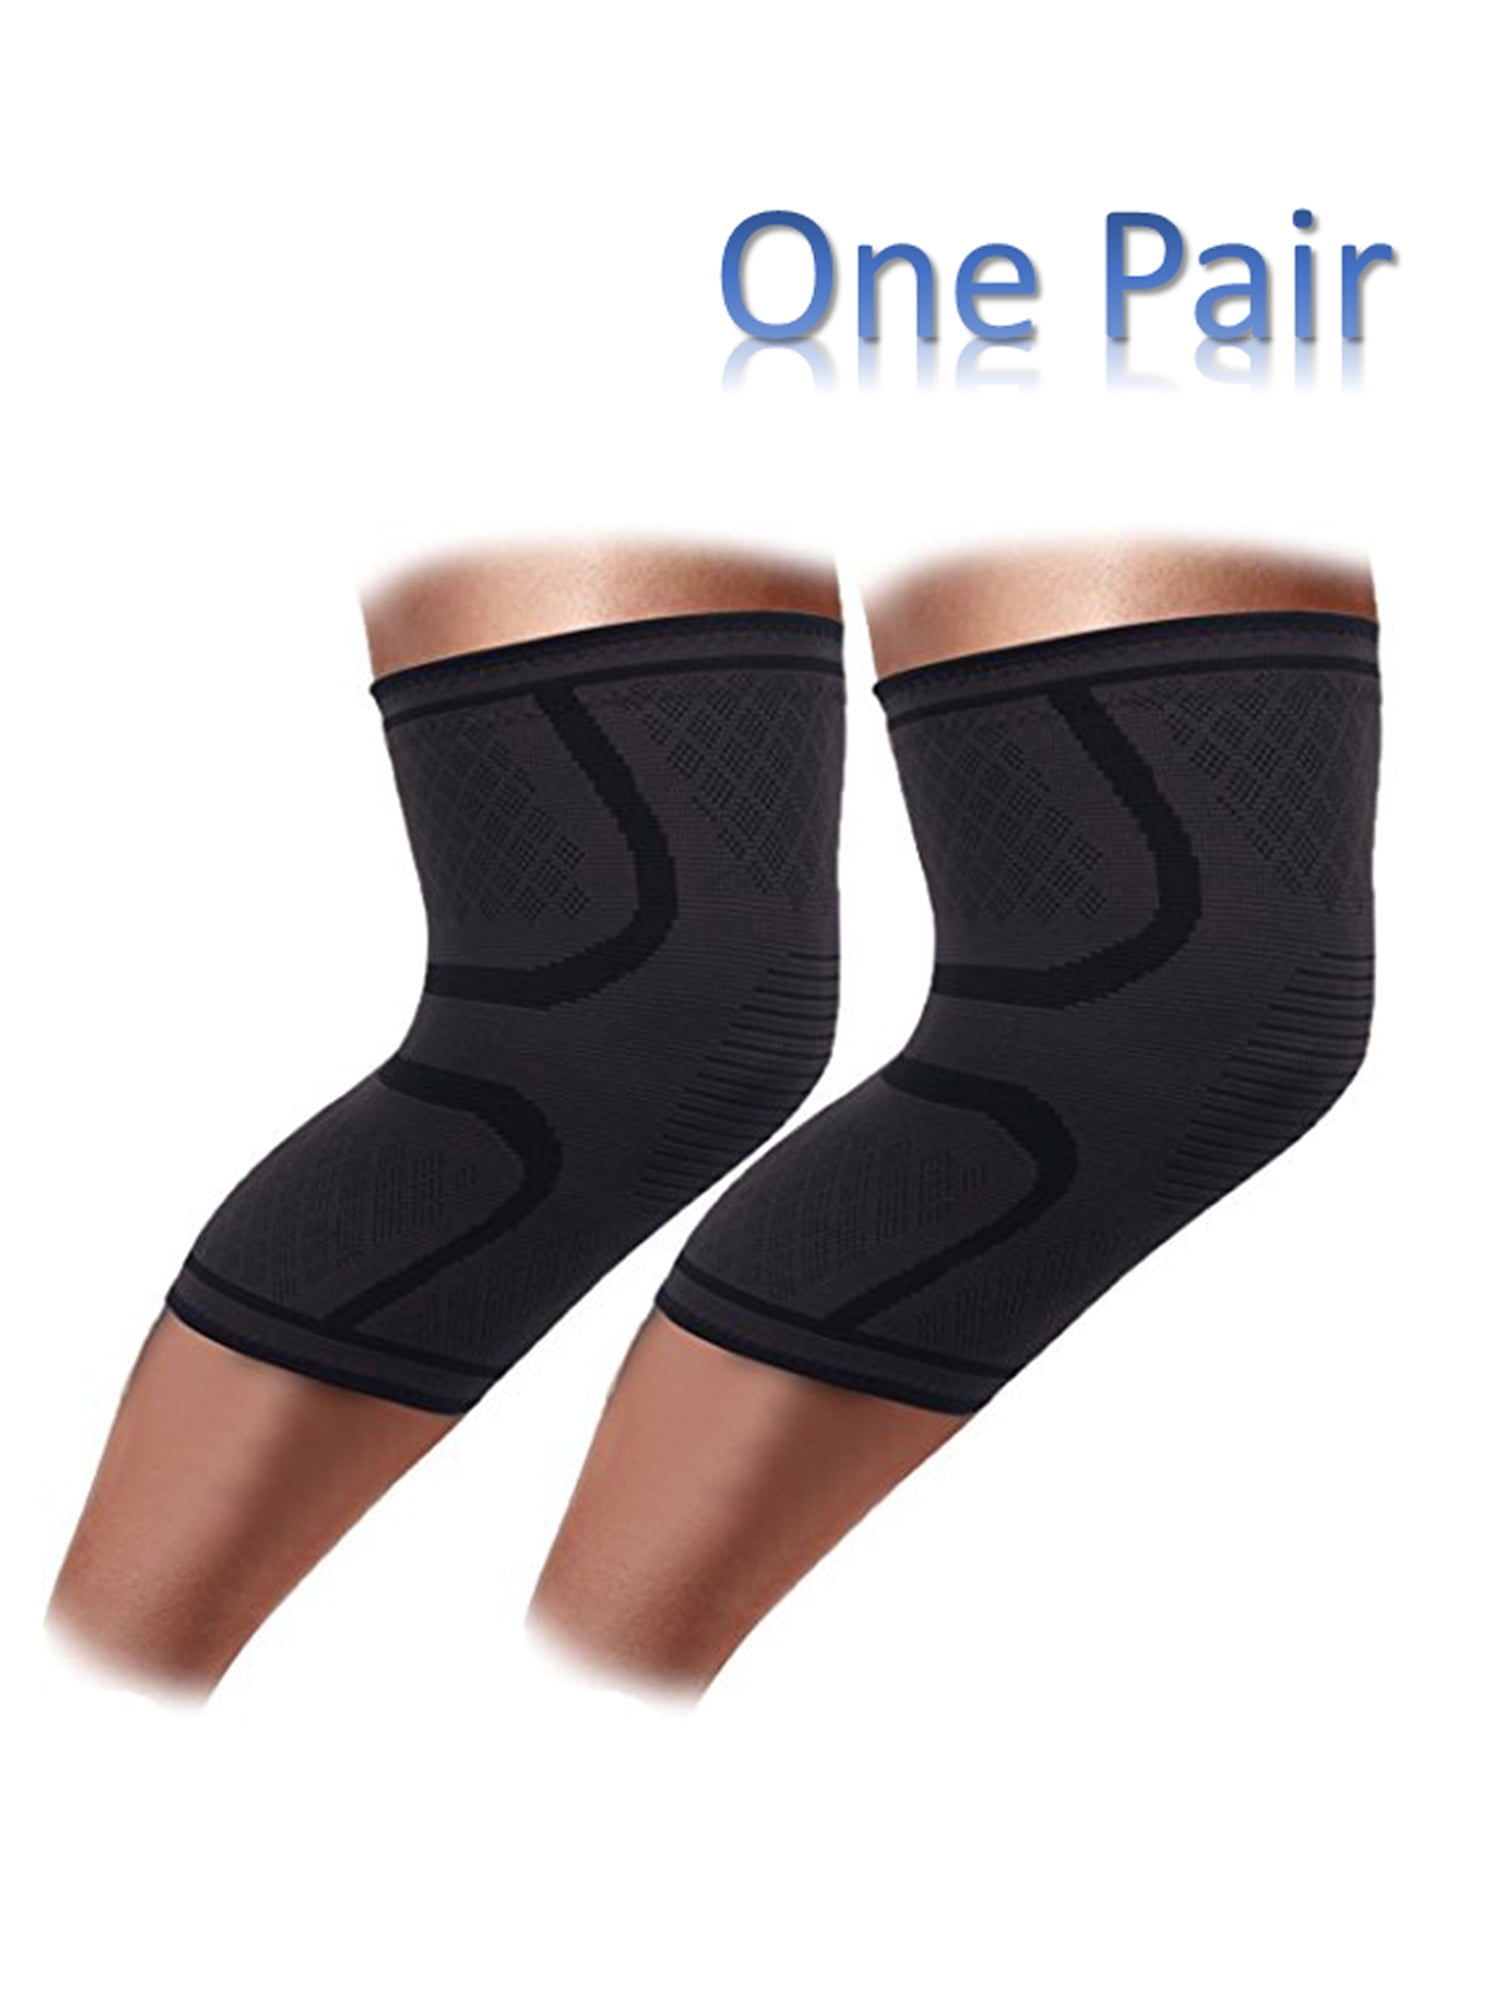 S&J FIT Knee Brace for Thigh Arthritis Pain and Support Meniscus Tear Compression Knee Pads for Basketball Volleyball Knee Sleeves for Men Women S Single 